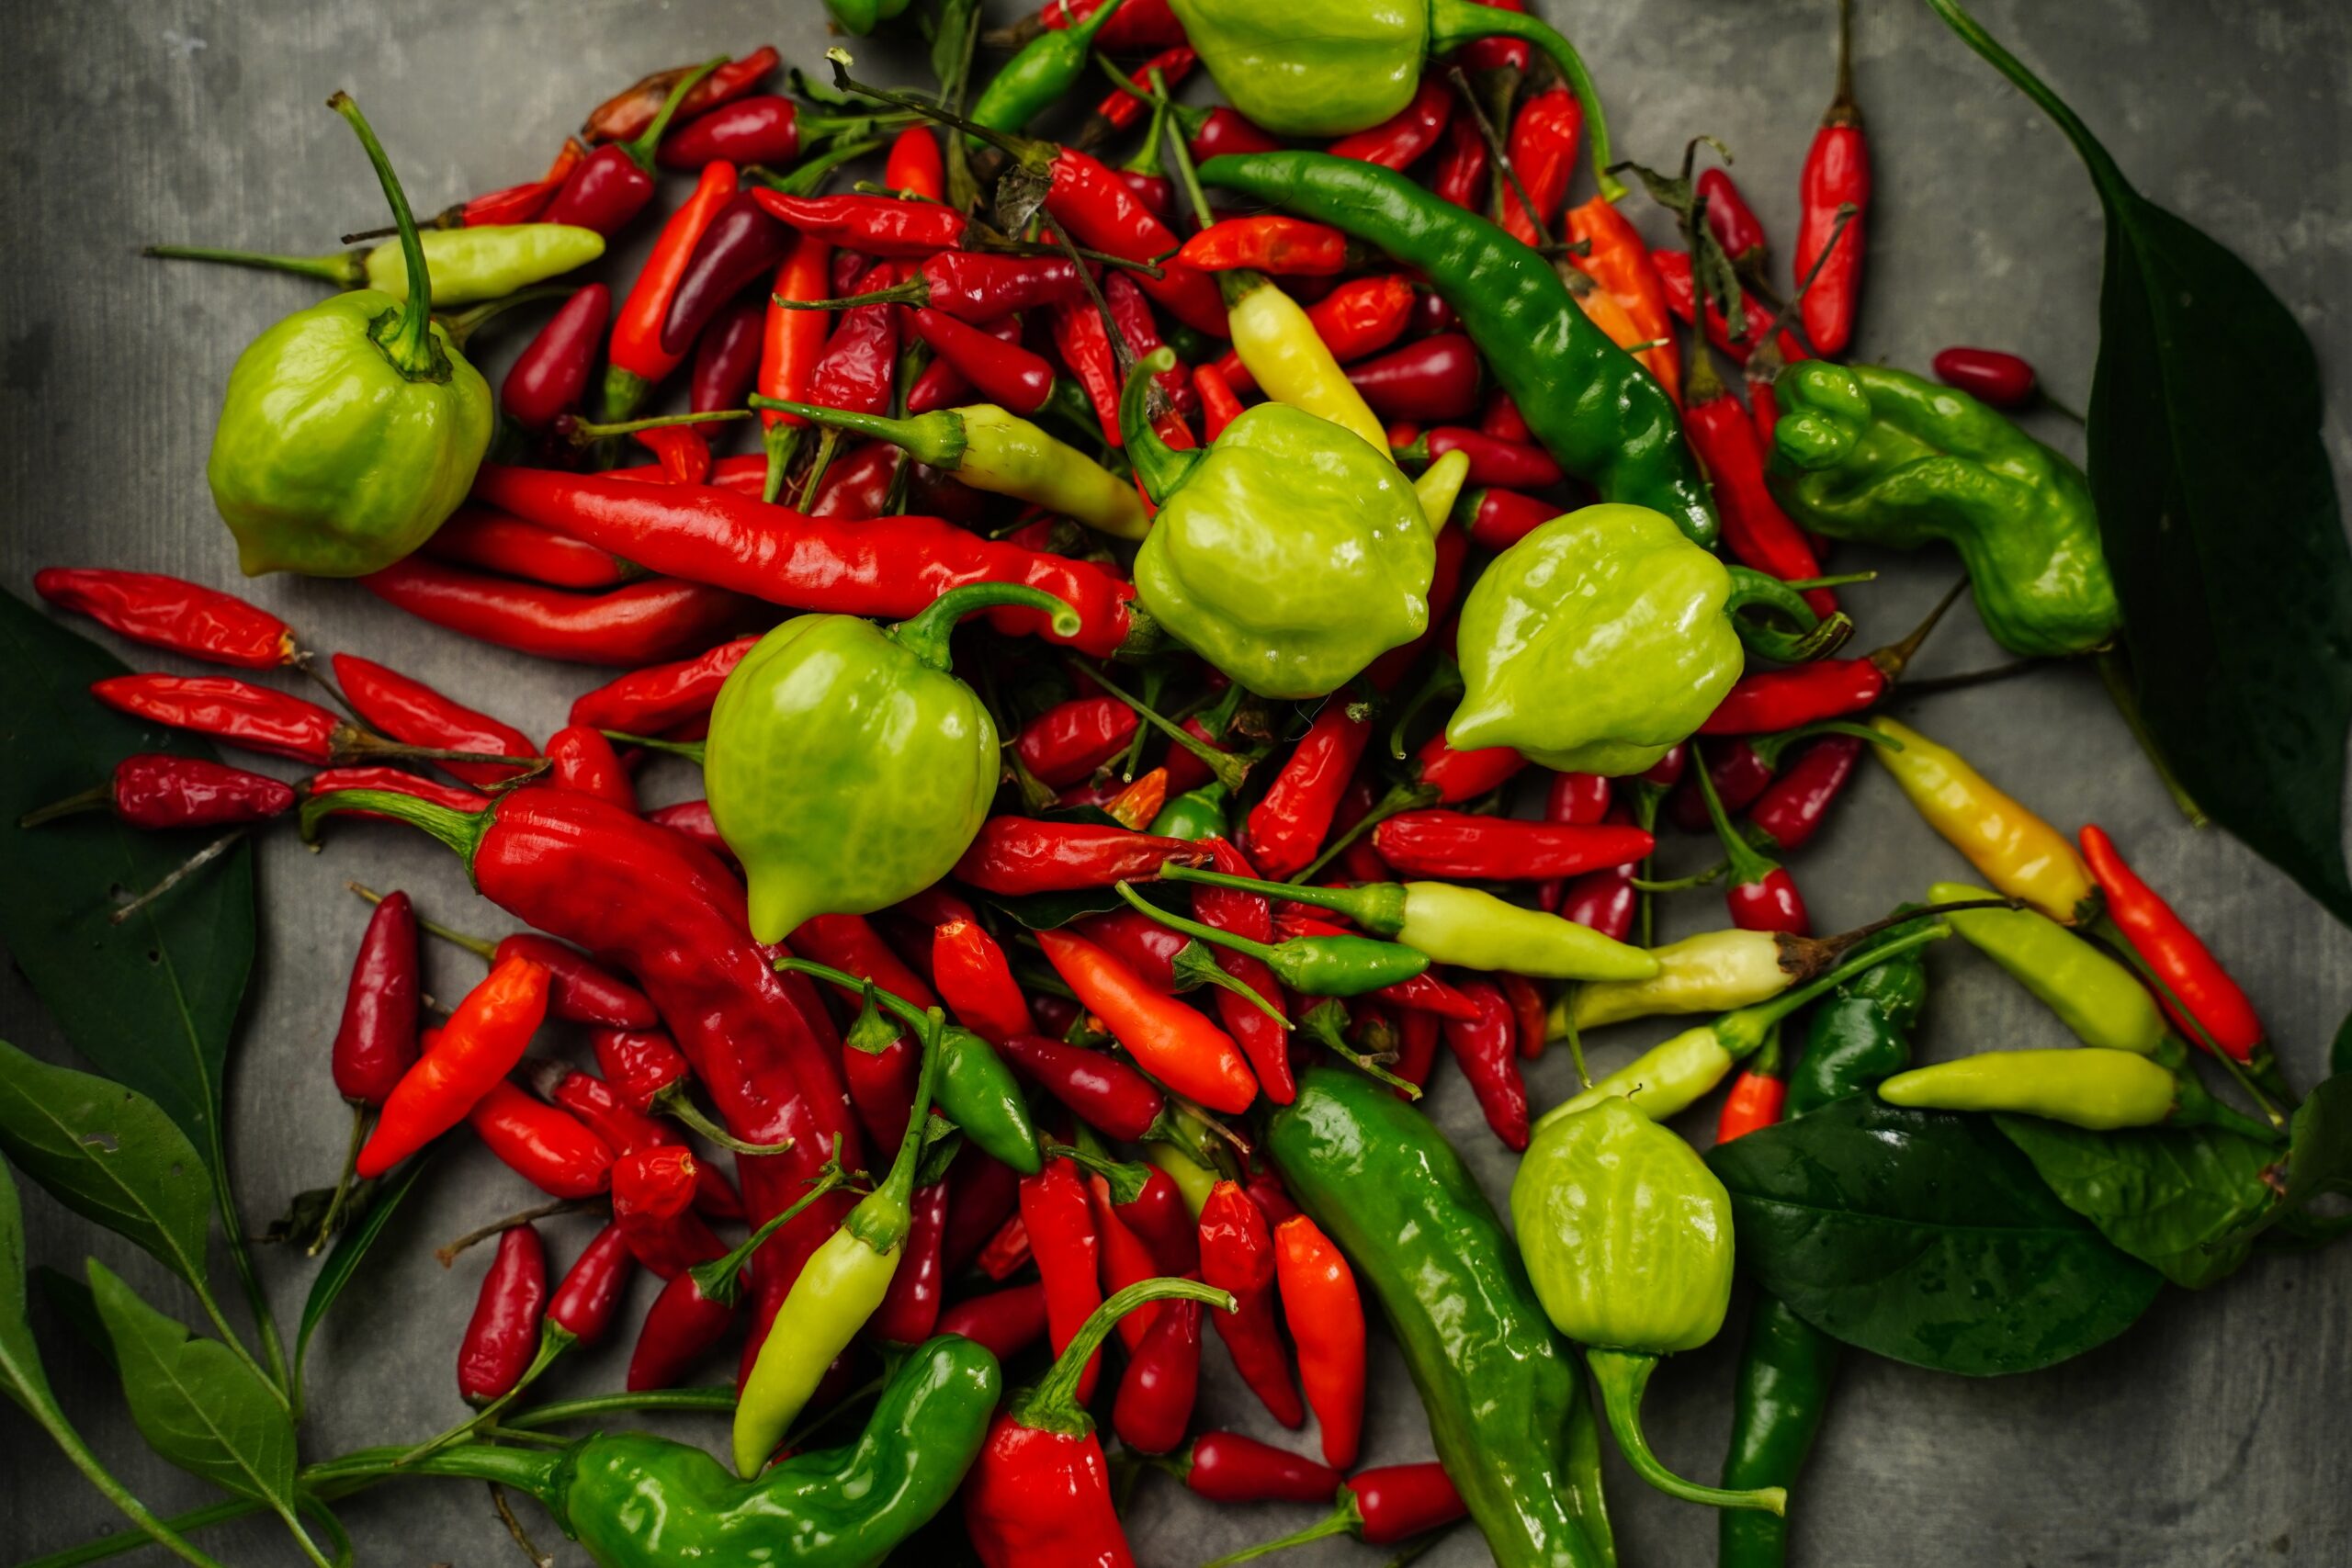 The Health Benefits of Spicy Foods on Longevity and Overall Health